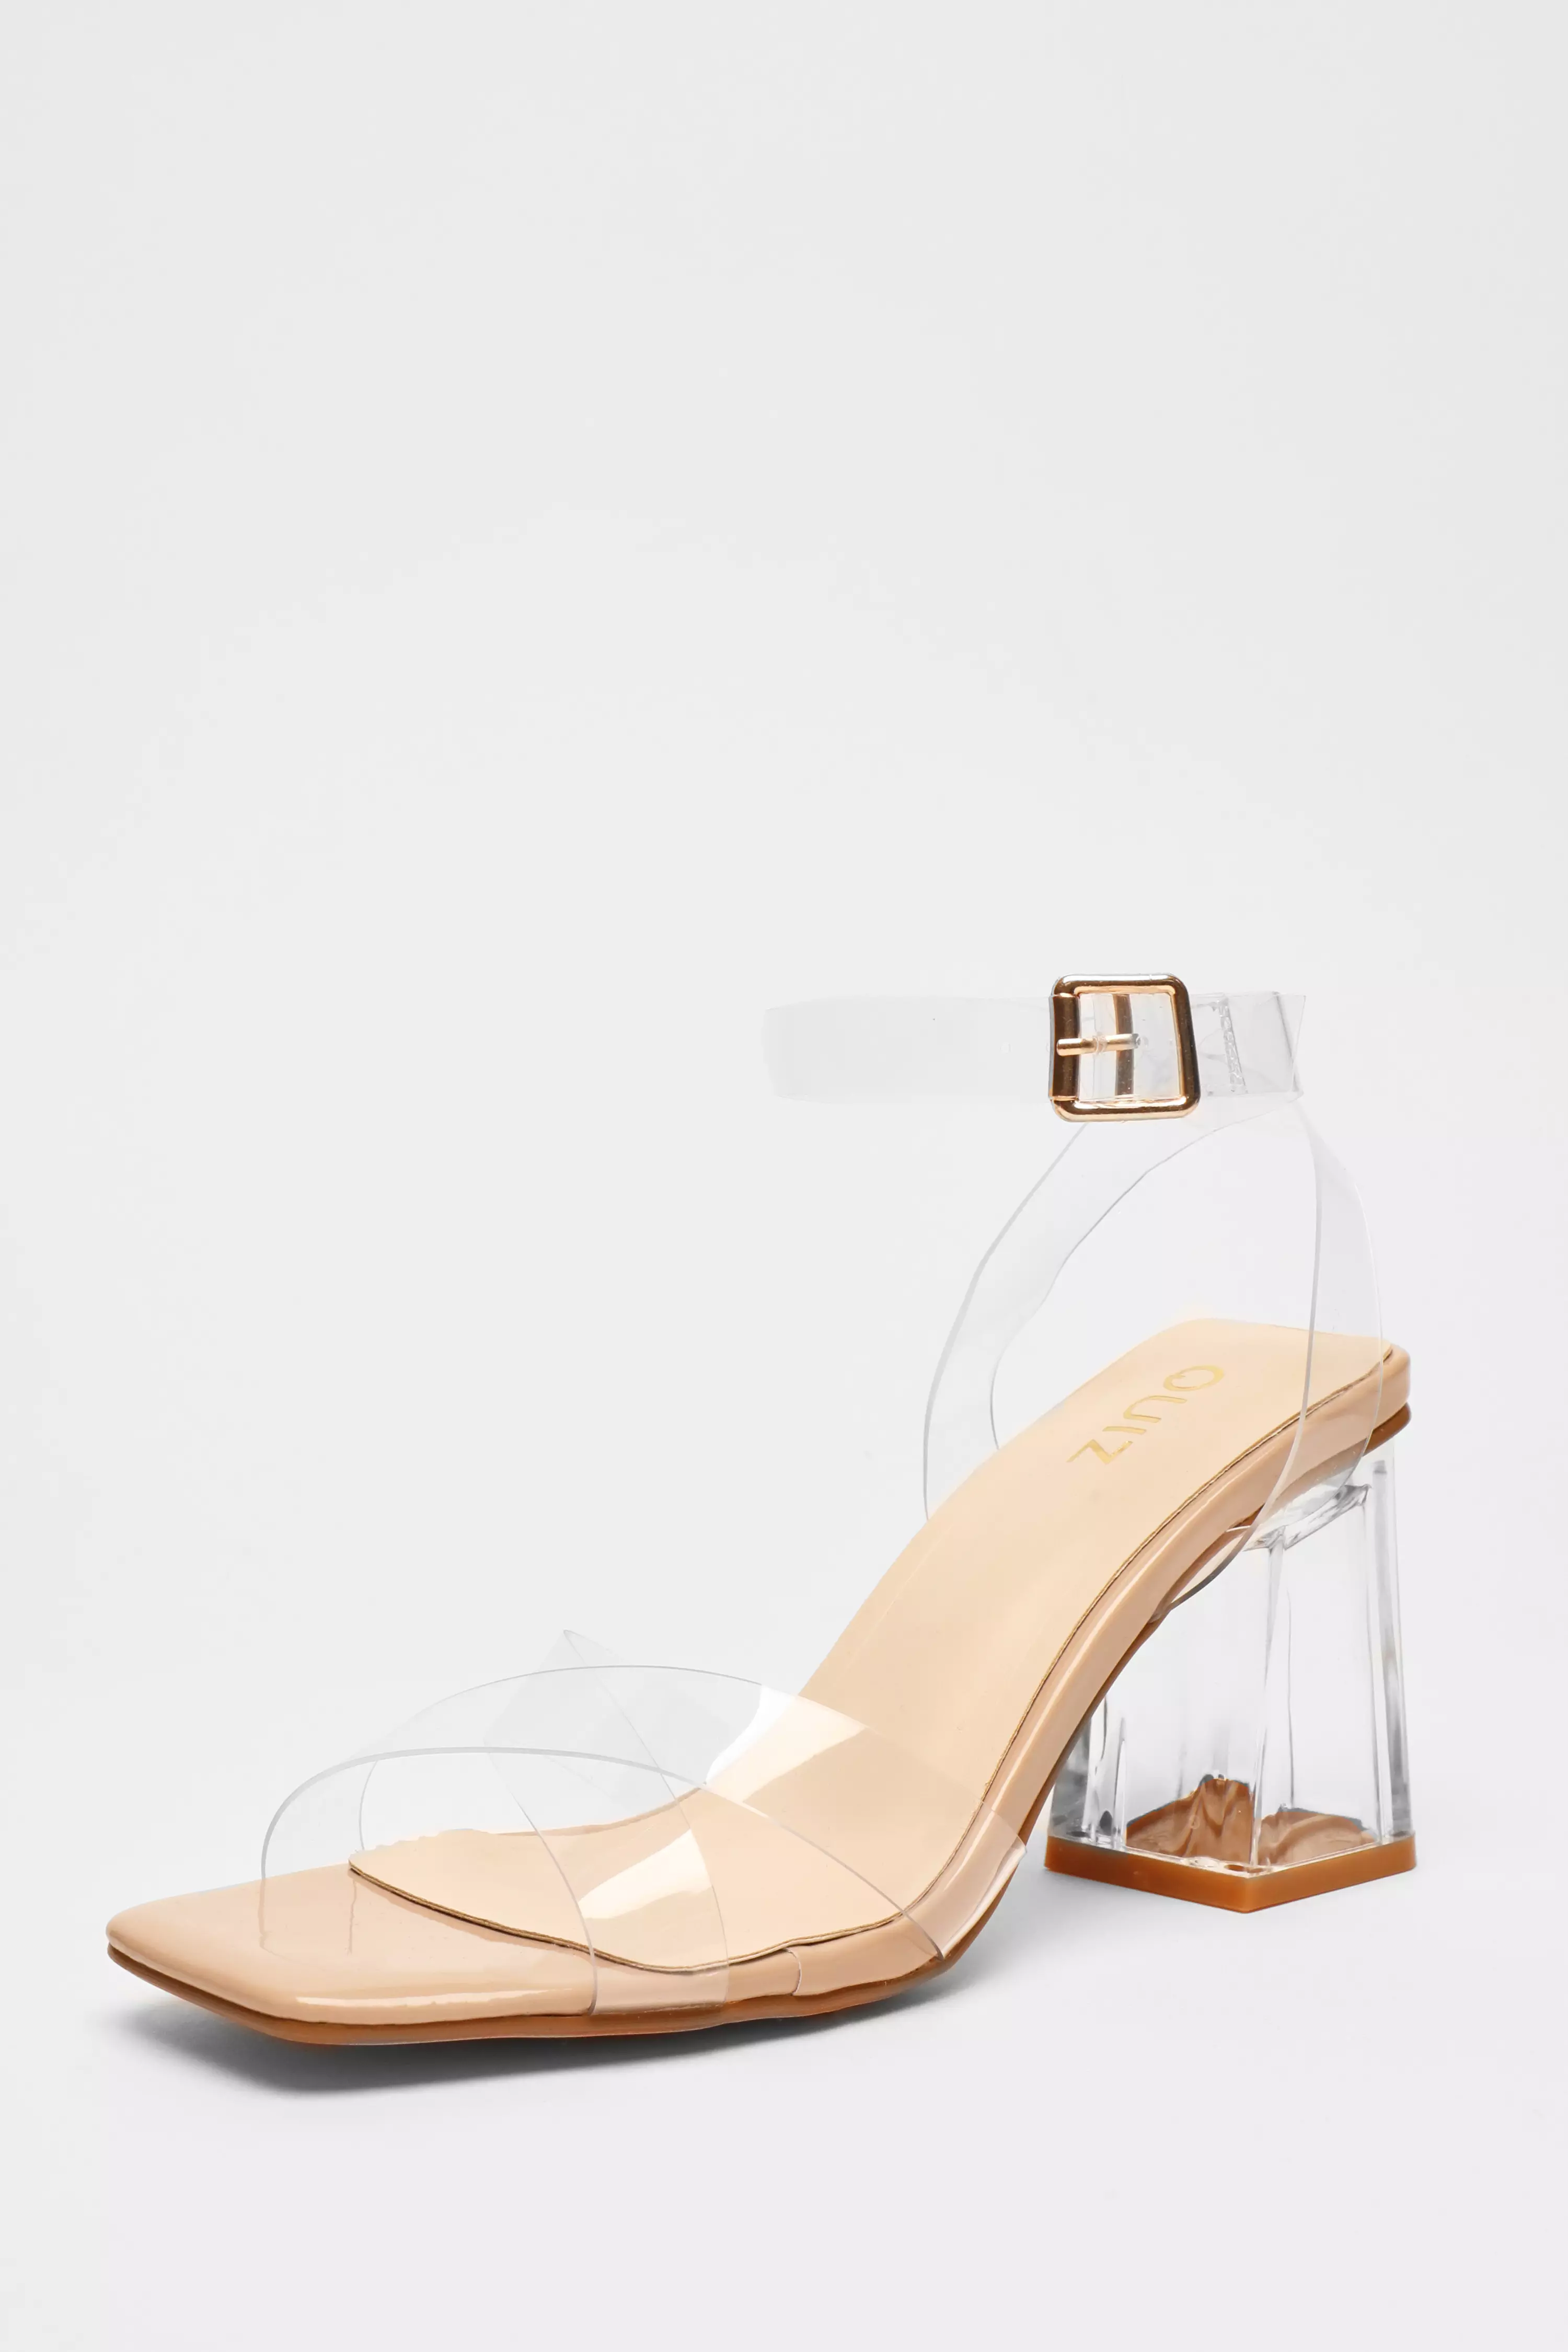 Nude Cross Strap Clear Heeled Sandals - QUIZ Clothing